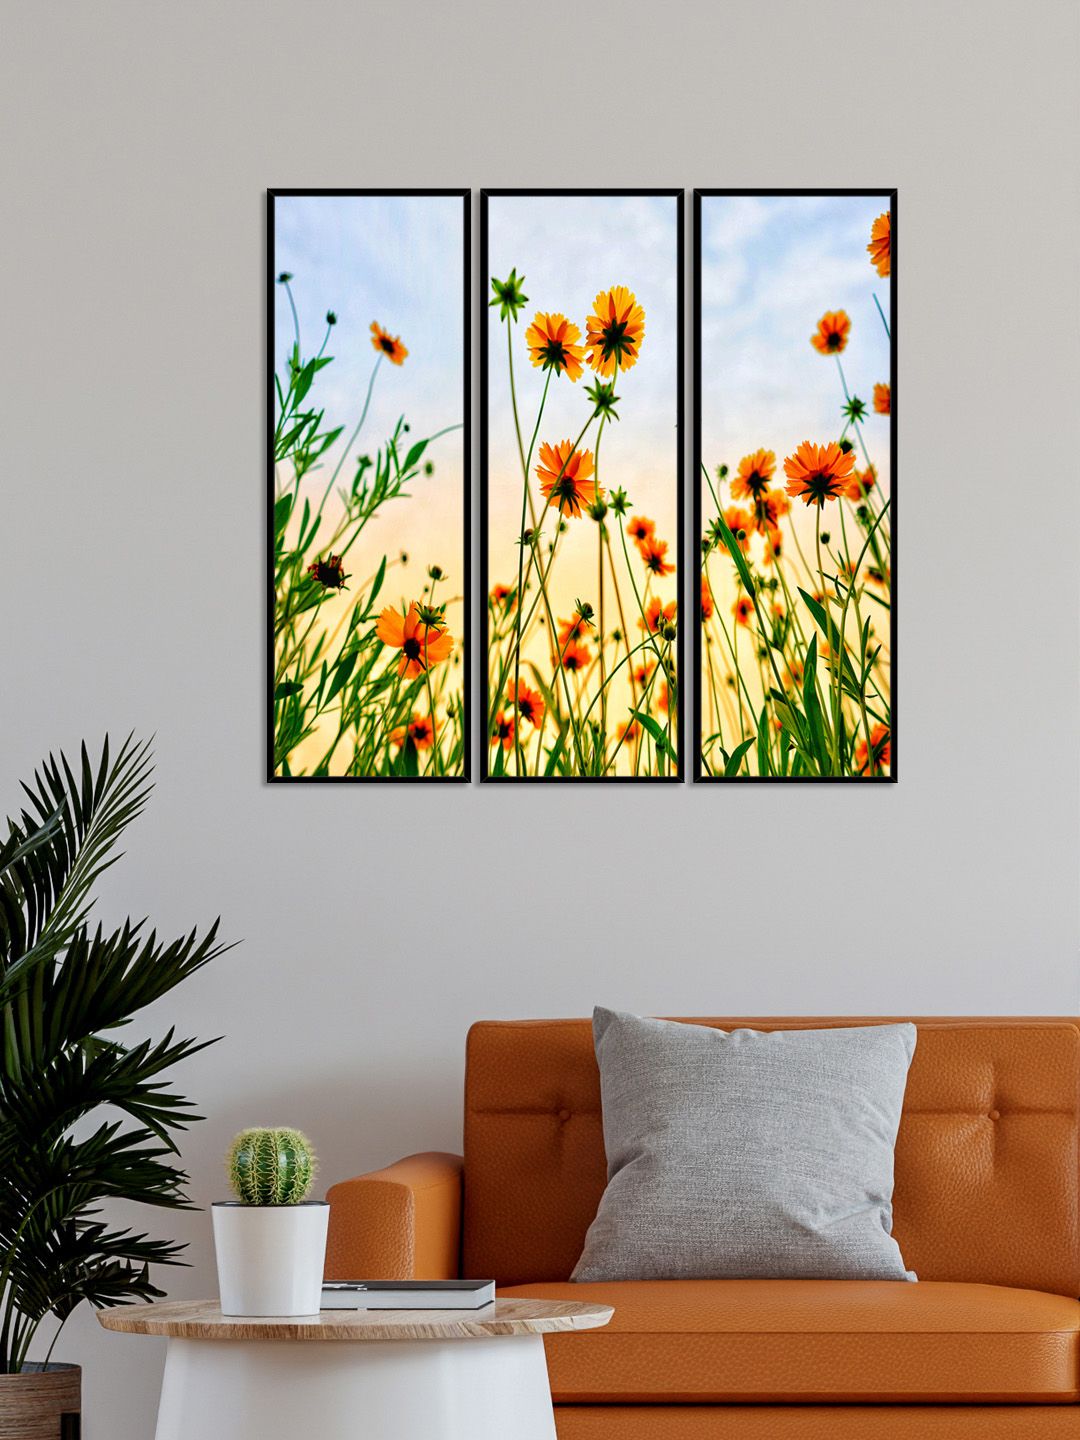 999Store Set of 4 Yellow & Green Sunflower Wall Paintings Price in India